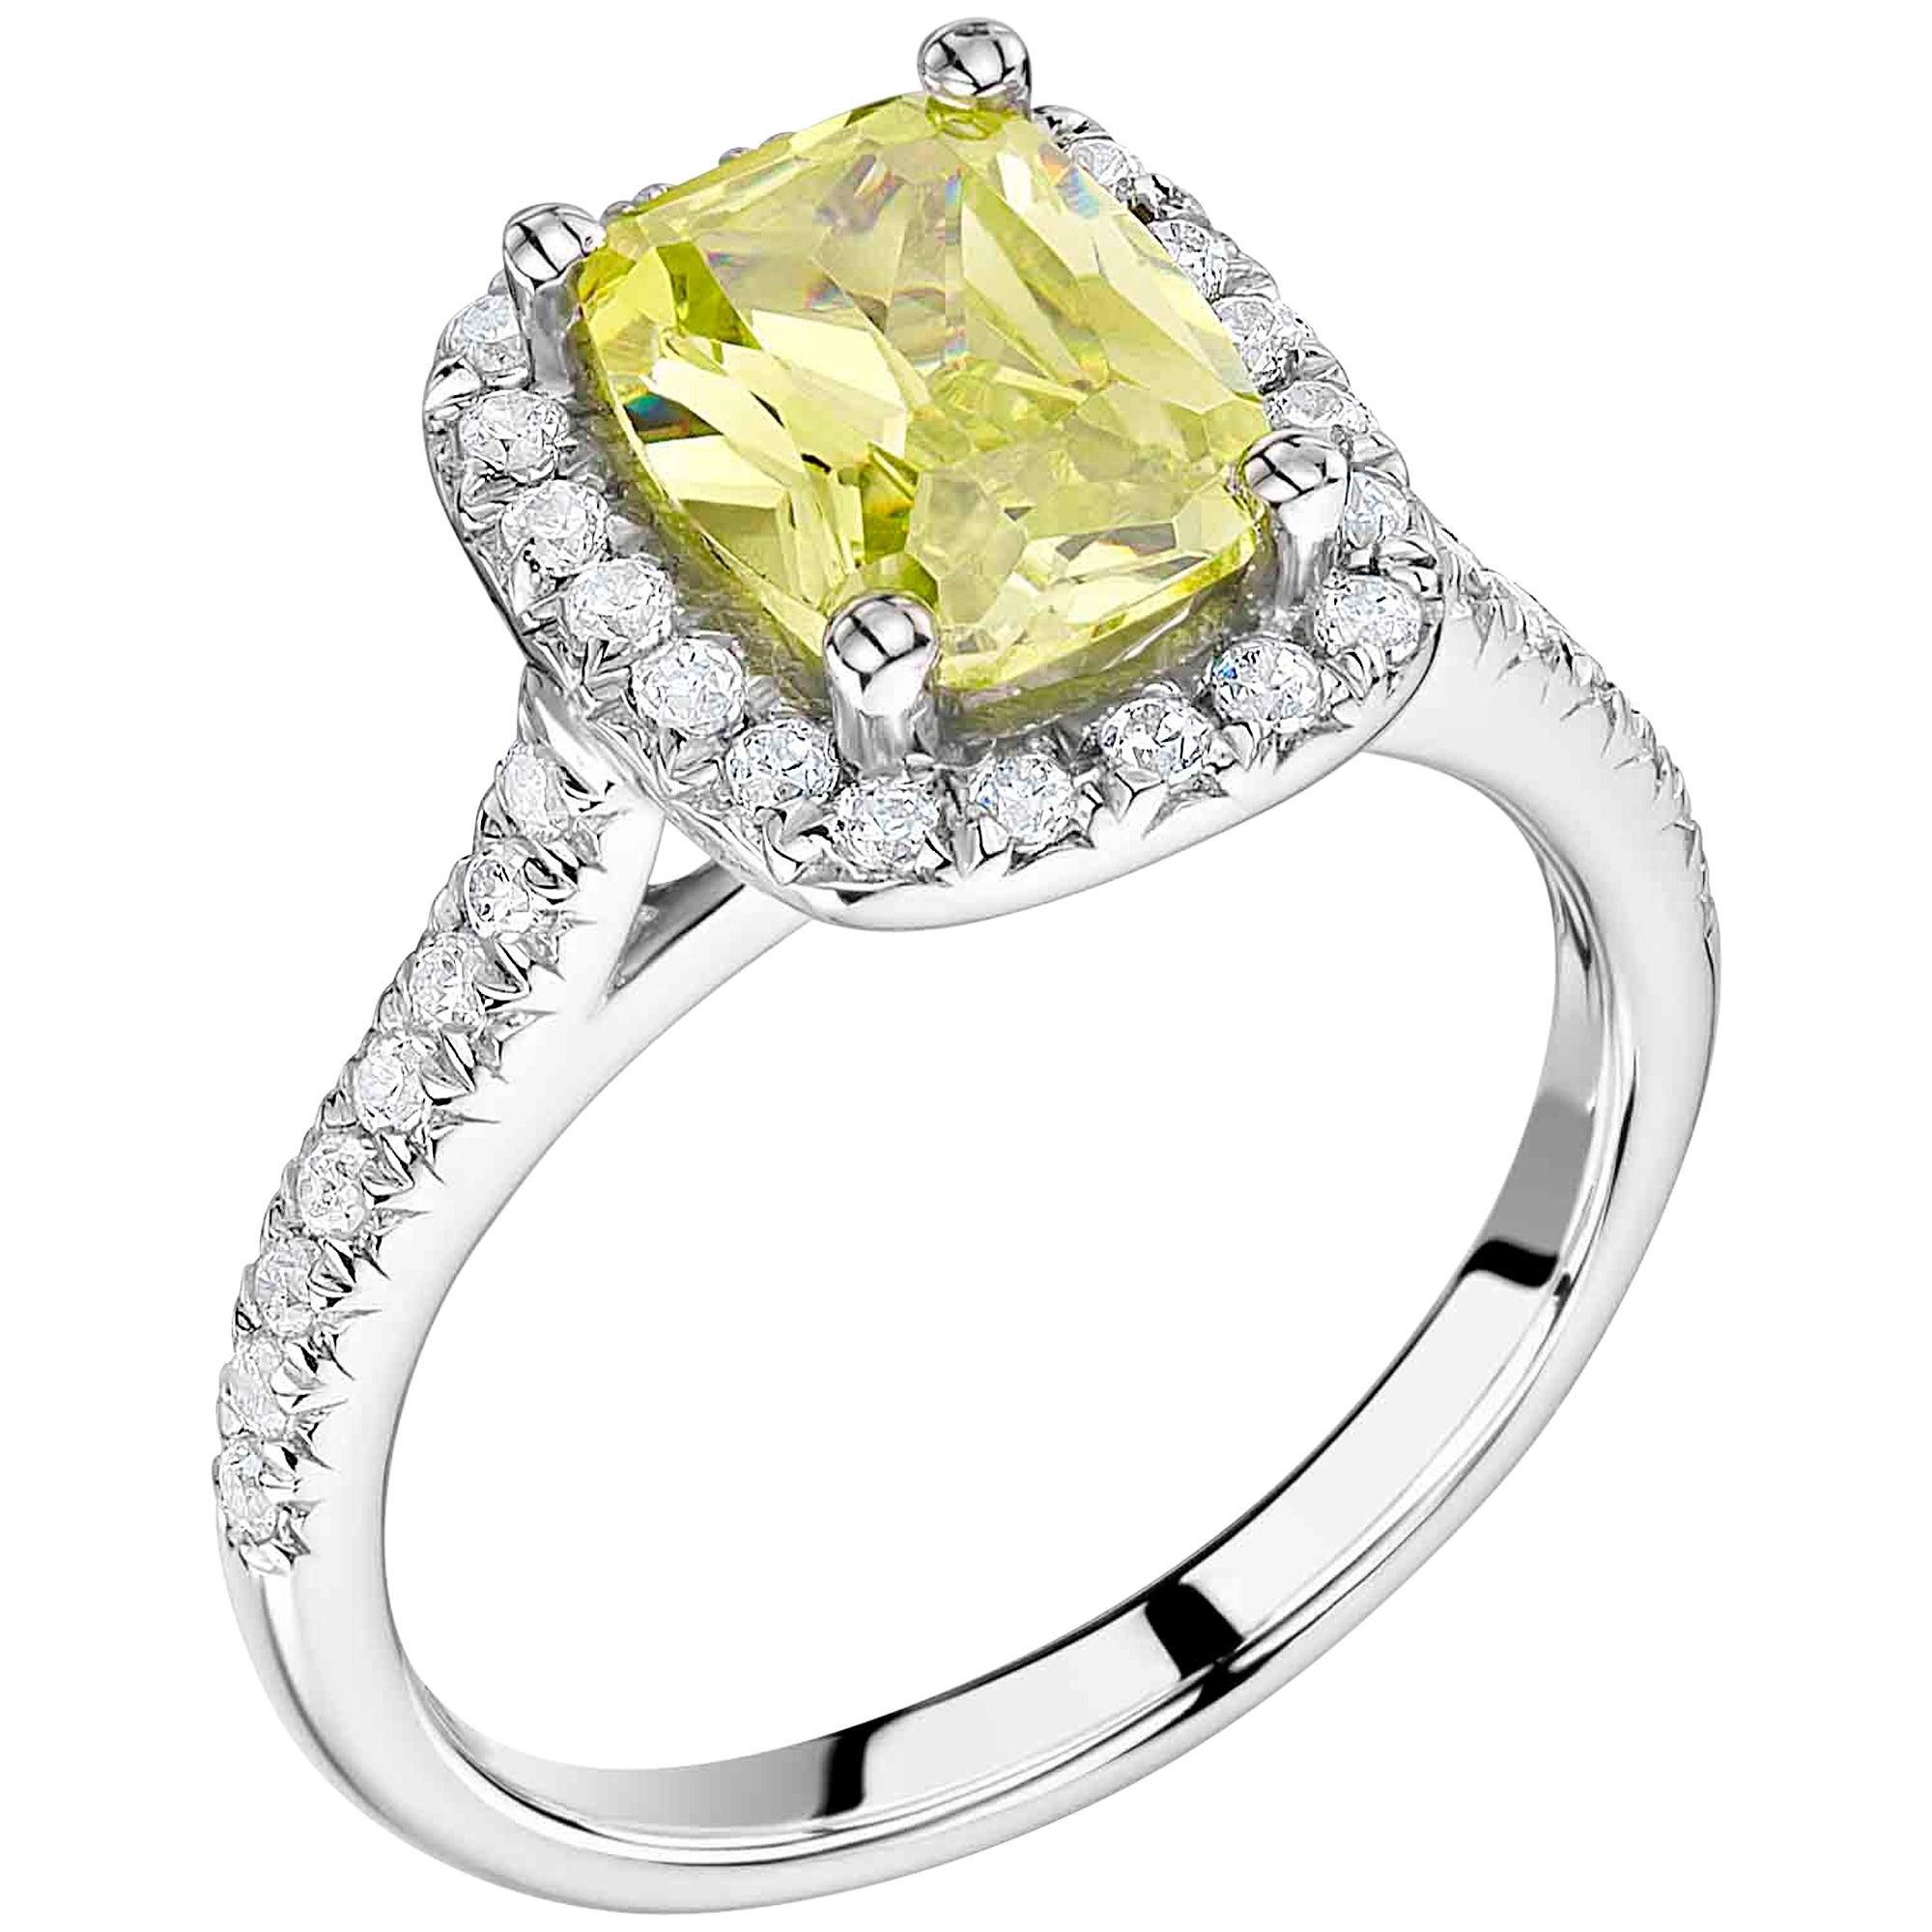 Yellow sapphires are lesser known but very attractive members of the corundum family.  Set in 18K white gold or platinum 950, the stand out brilliantly and this representative design accentuates the beauty of the centres tone with a contrasting